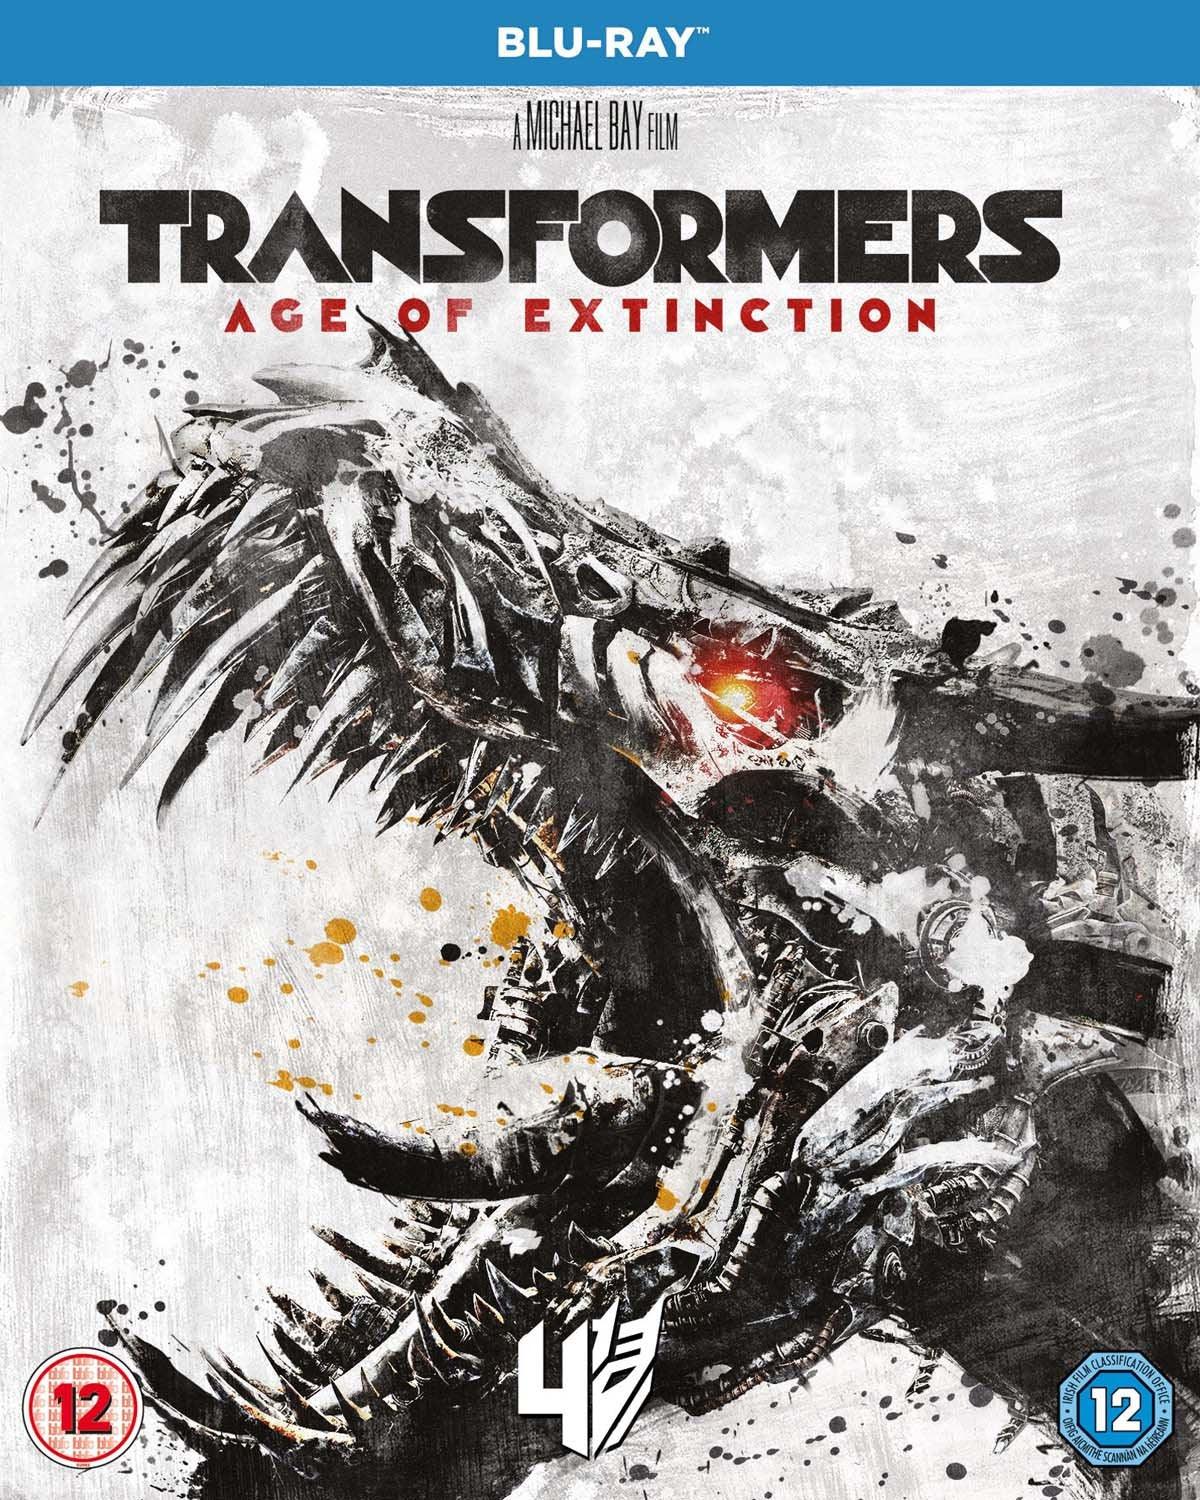 BLU-RAY AGE OF EXTINCTION - TRANSFORMERS - Magic Dreams Store